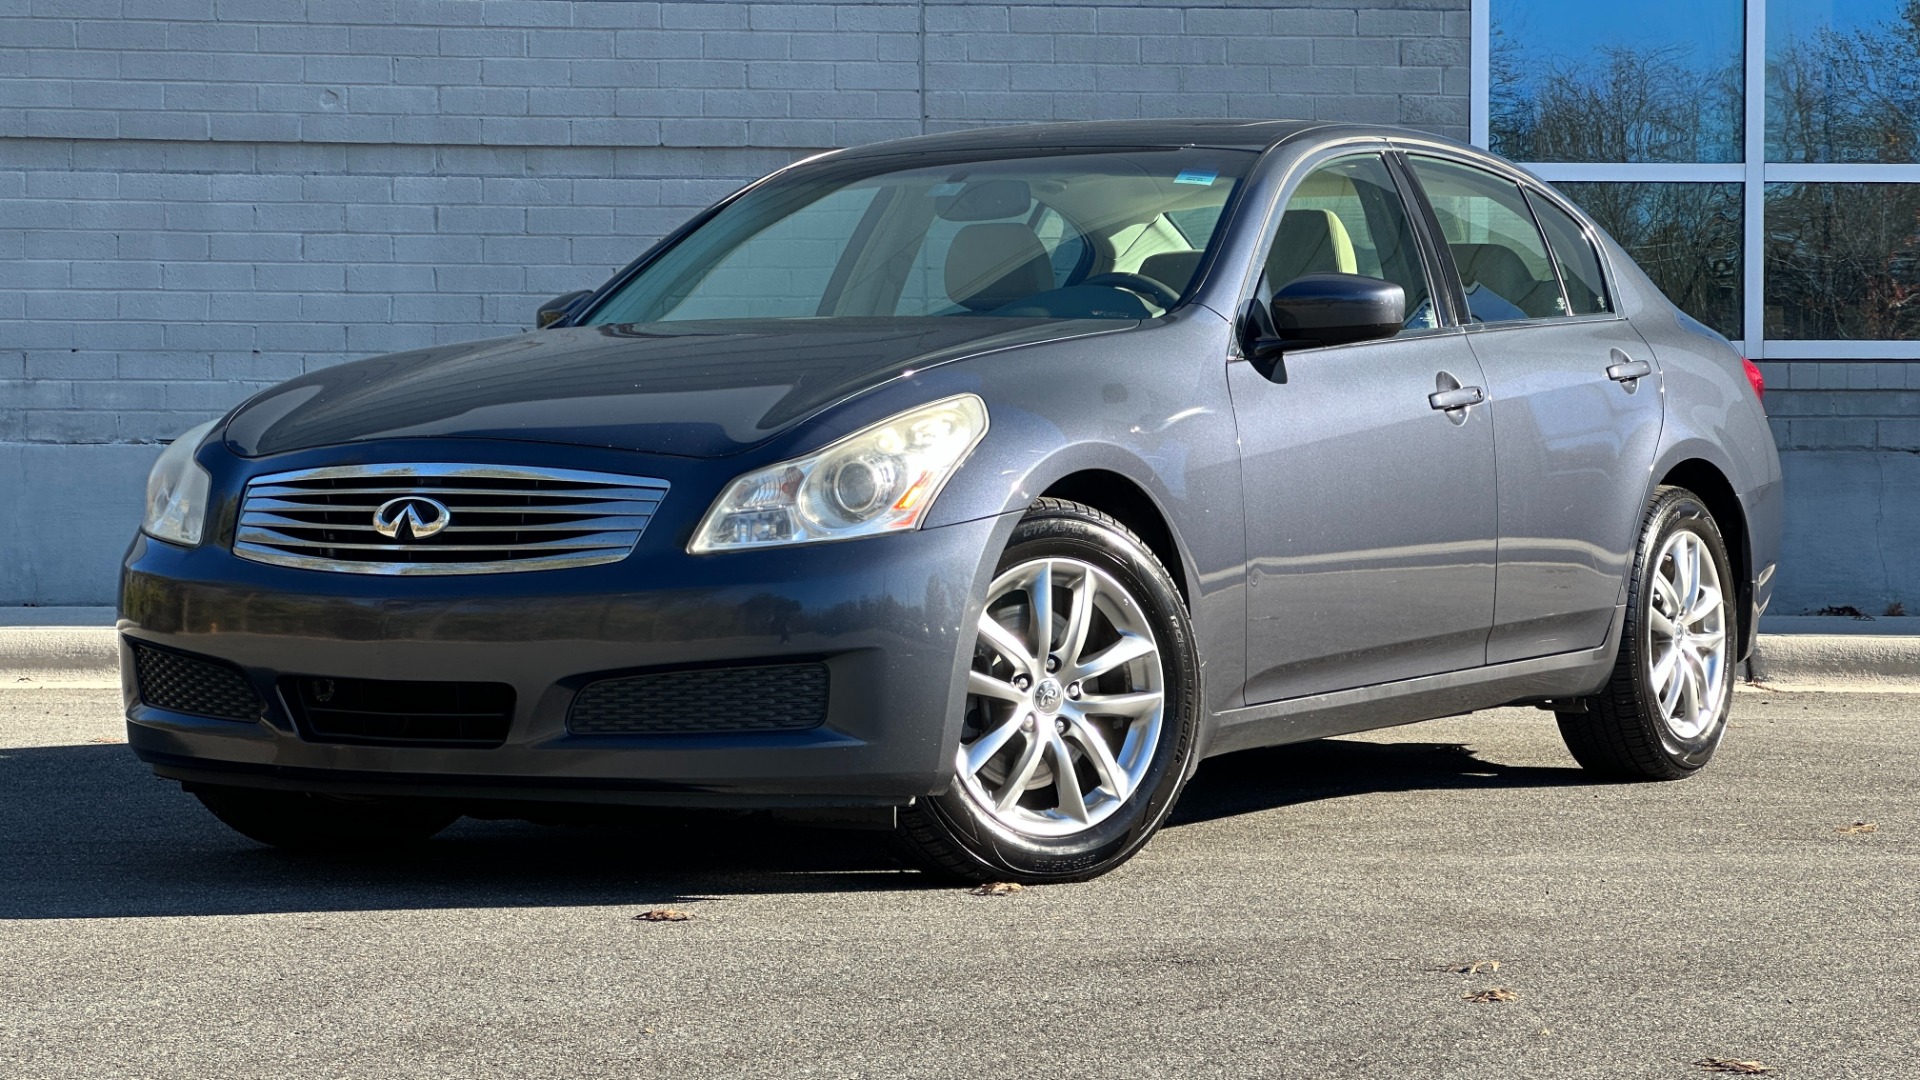 Used 2009 INFINITI G37 Sedan X / AWD / PREMIUM PACKAGE / BOSE / LEATHER / 3.7L V6 / WOOD TRIM for sale $6,200 at Formula Imports in Charlotte NC 28227 1